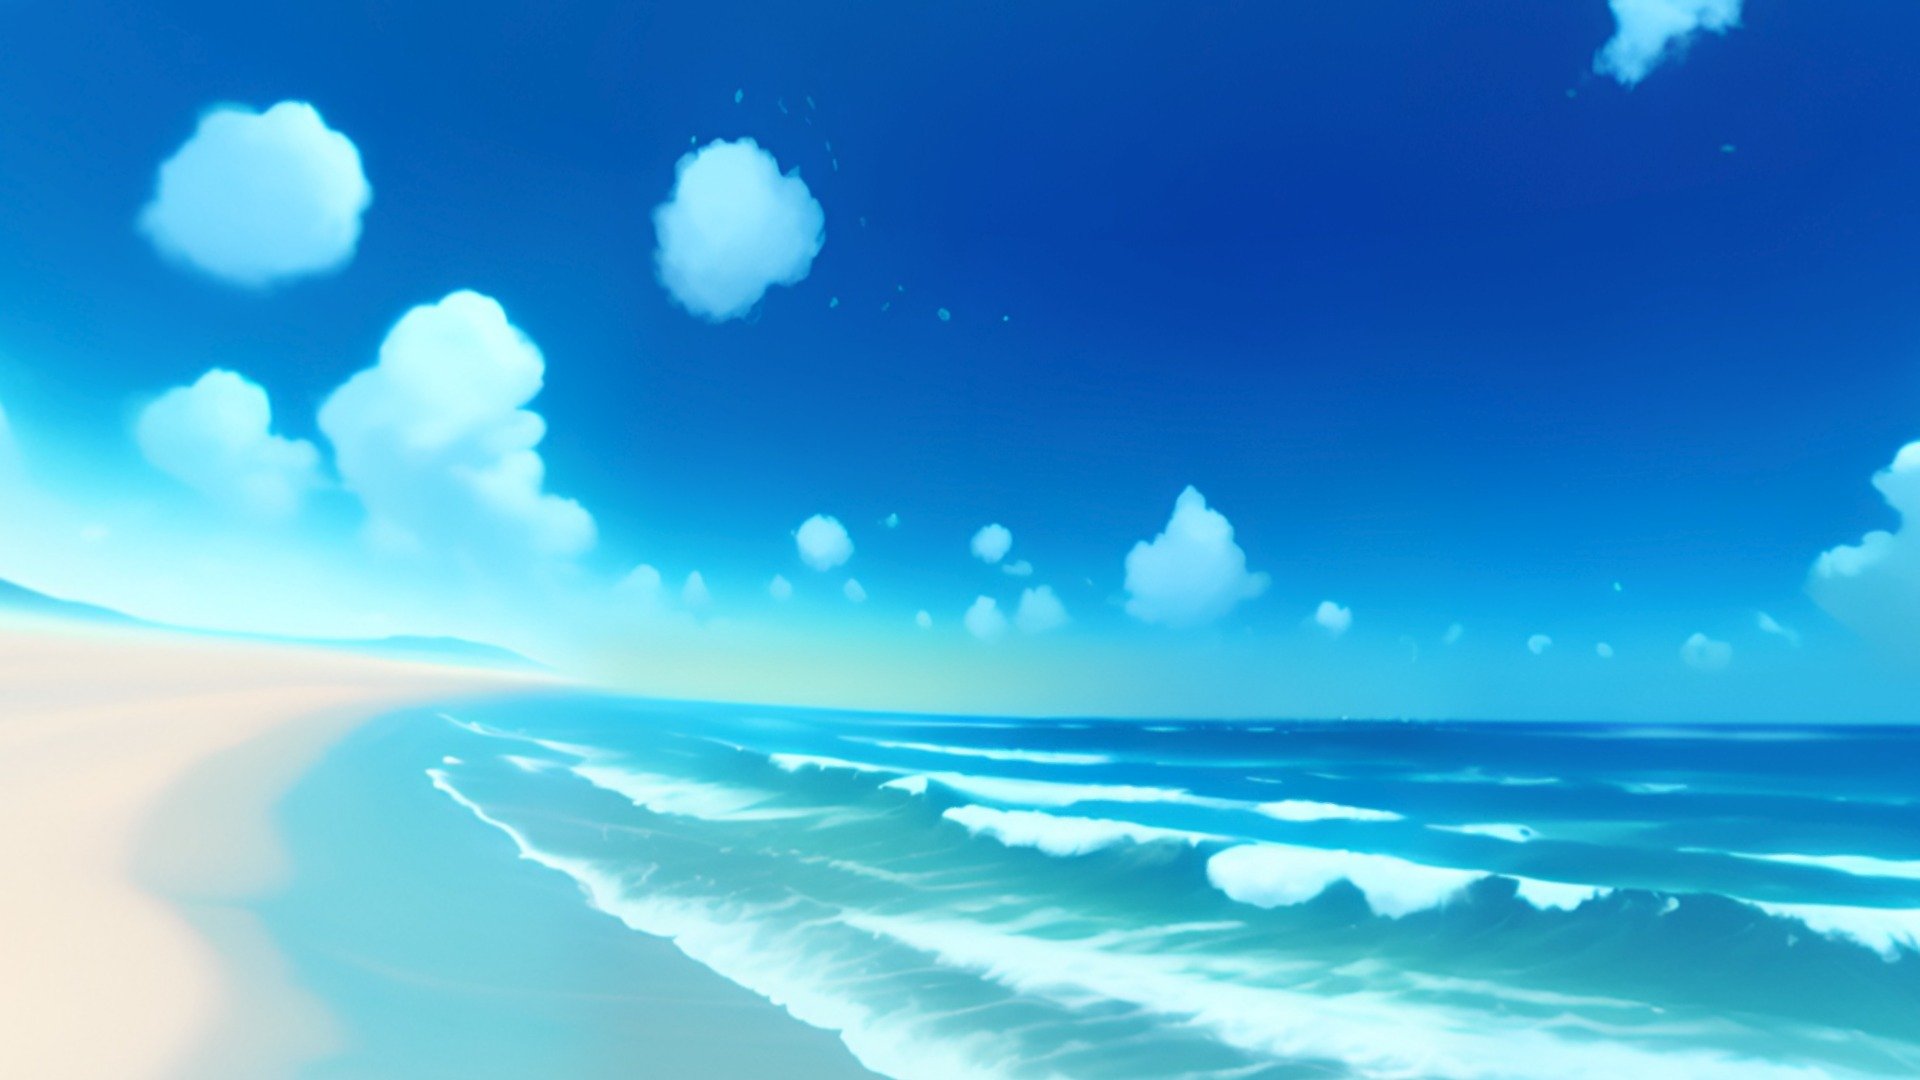 Lofi Anime Cocktail On A Beach Bar, Summer Vibes, Illustration Wallpaper  Background, Generated By AI Stock Photo, Picture and Royalty Free Image.  Image 206286996.